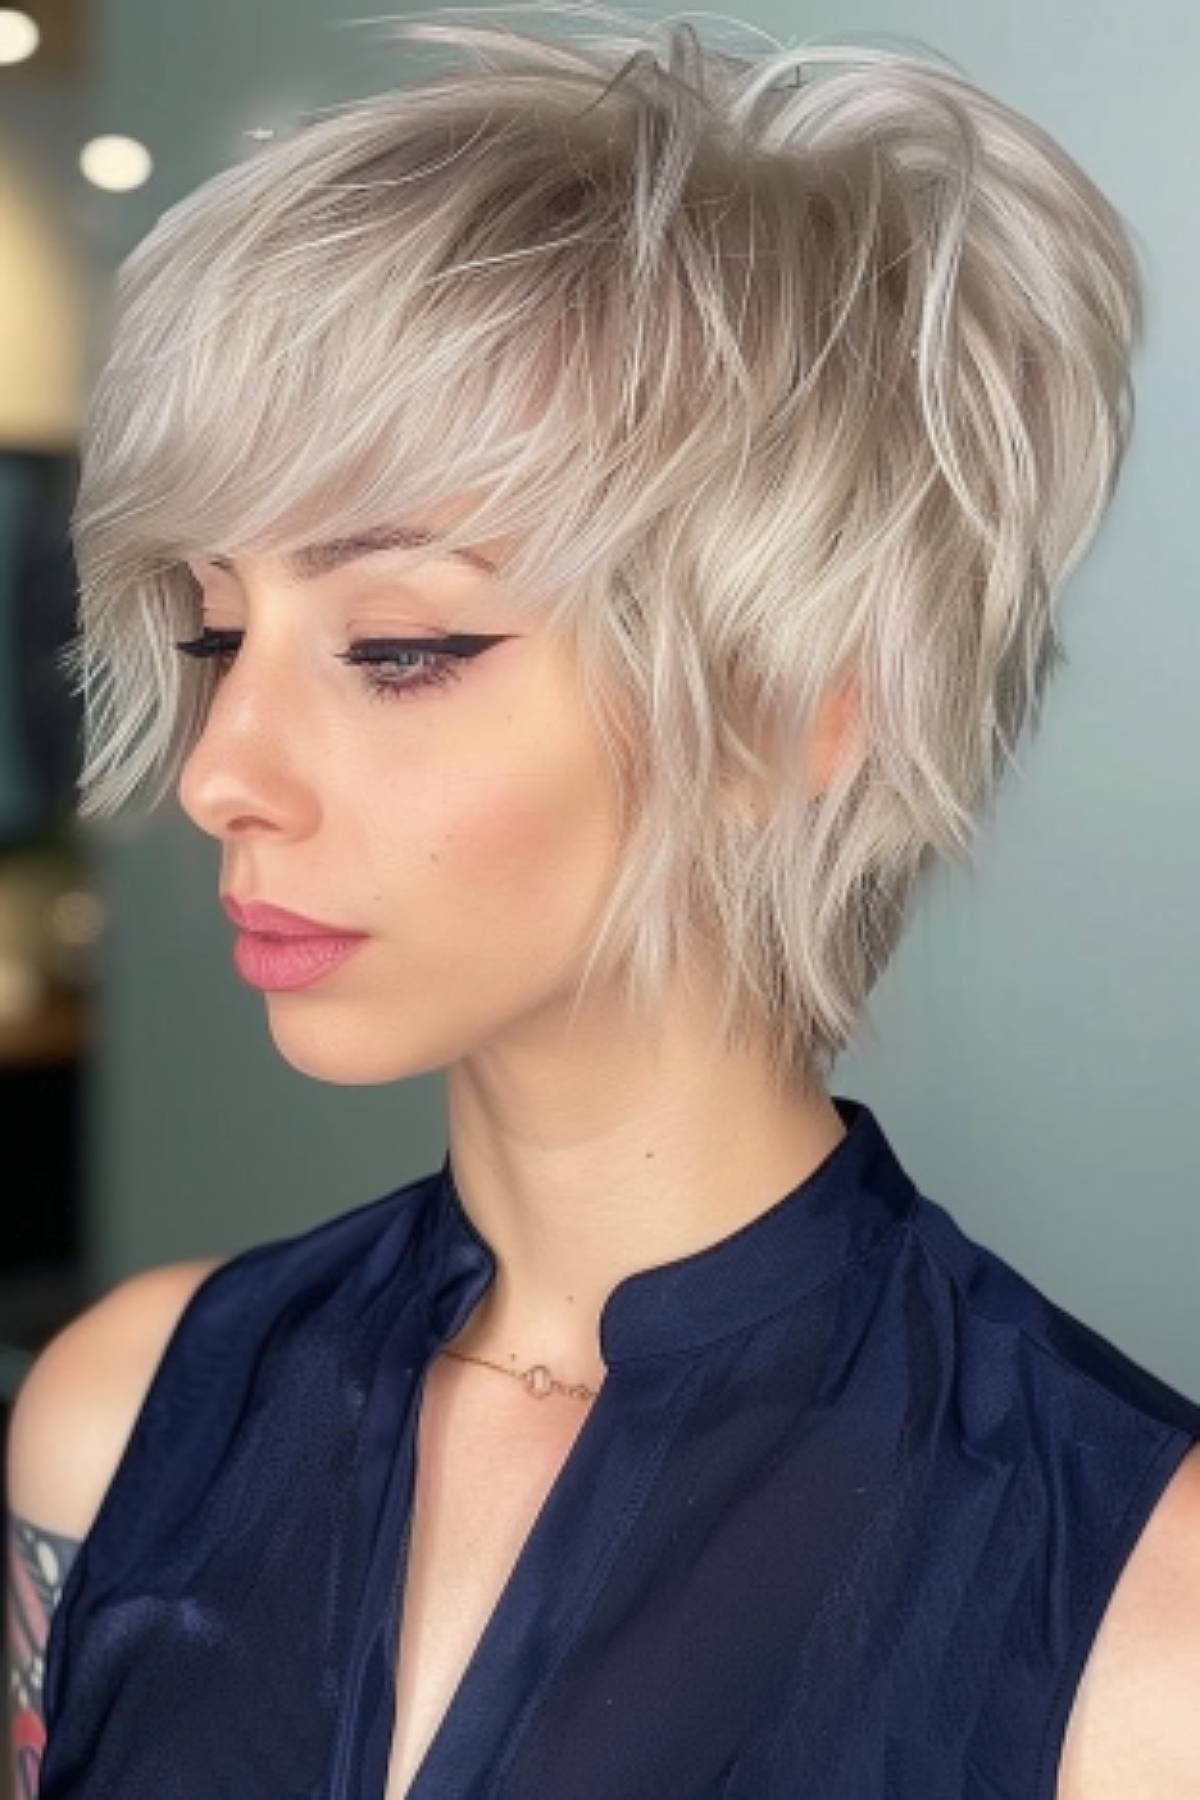 The woman created a lively and voluminous hairstyle with an angled pixie cut accentuated by dynamic layers.